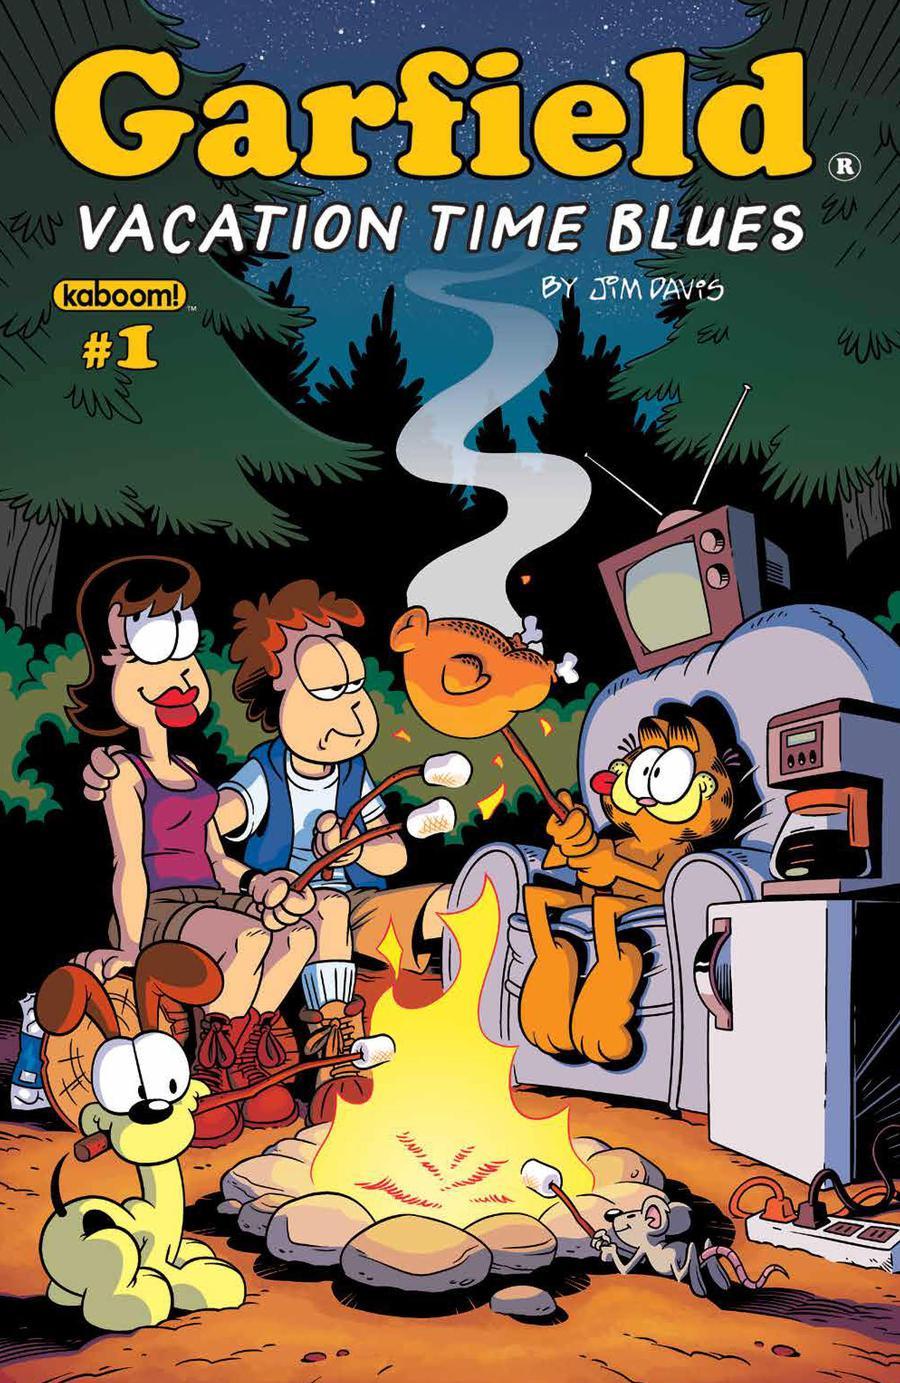 Garfield 2018 Vacation Time Blues Vol. 1 #1